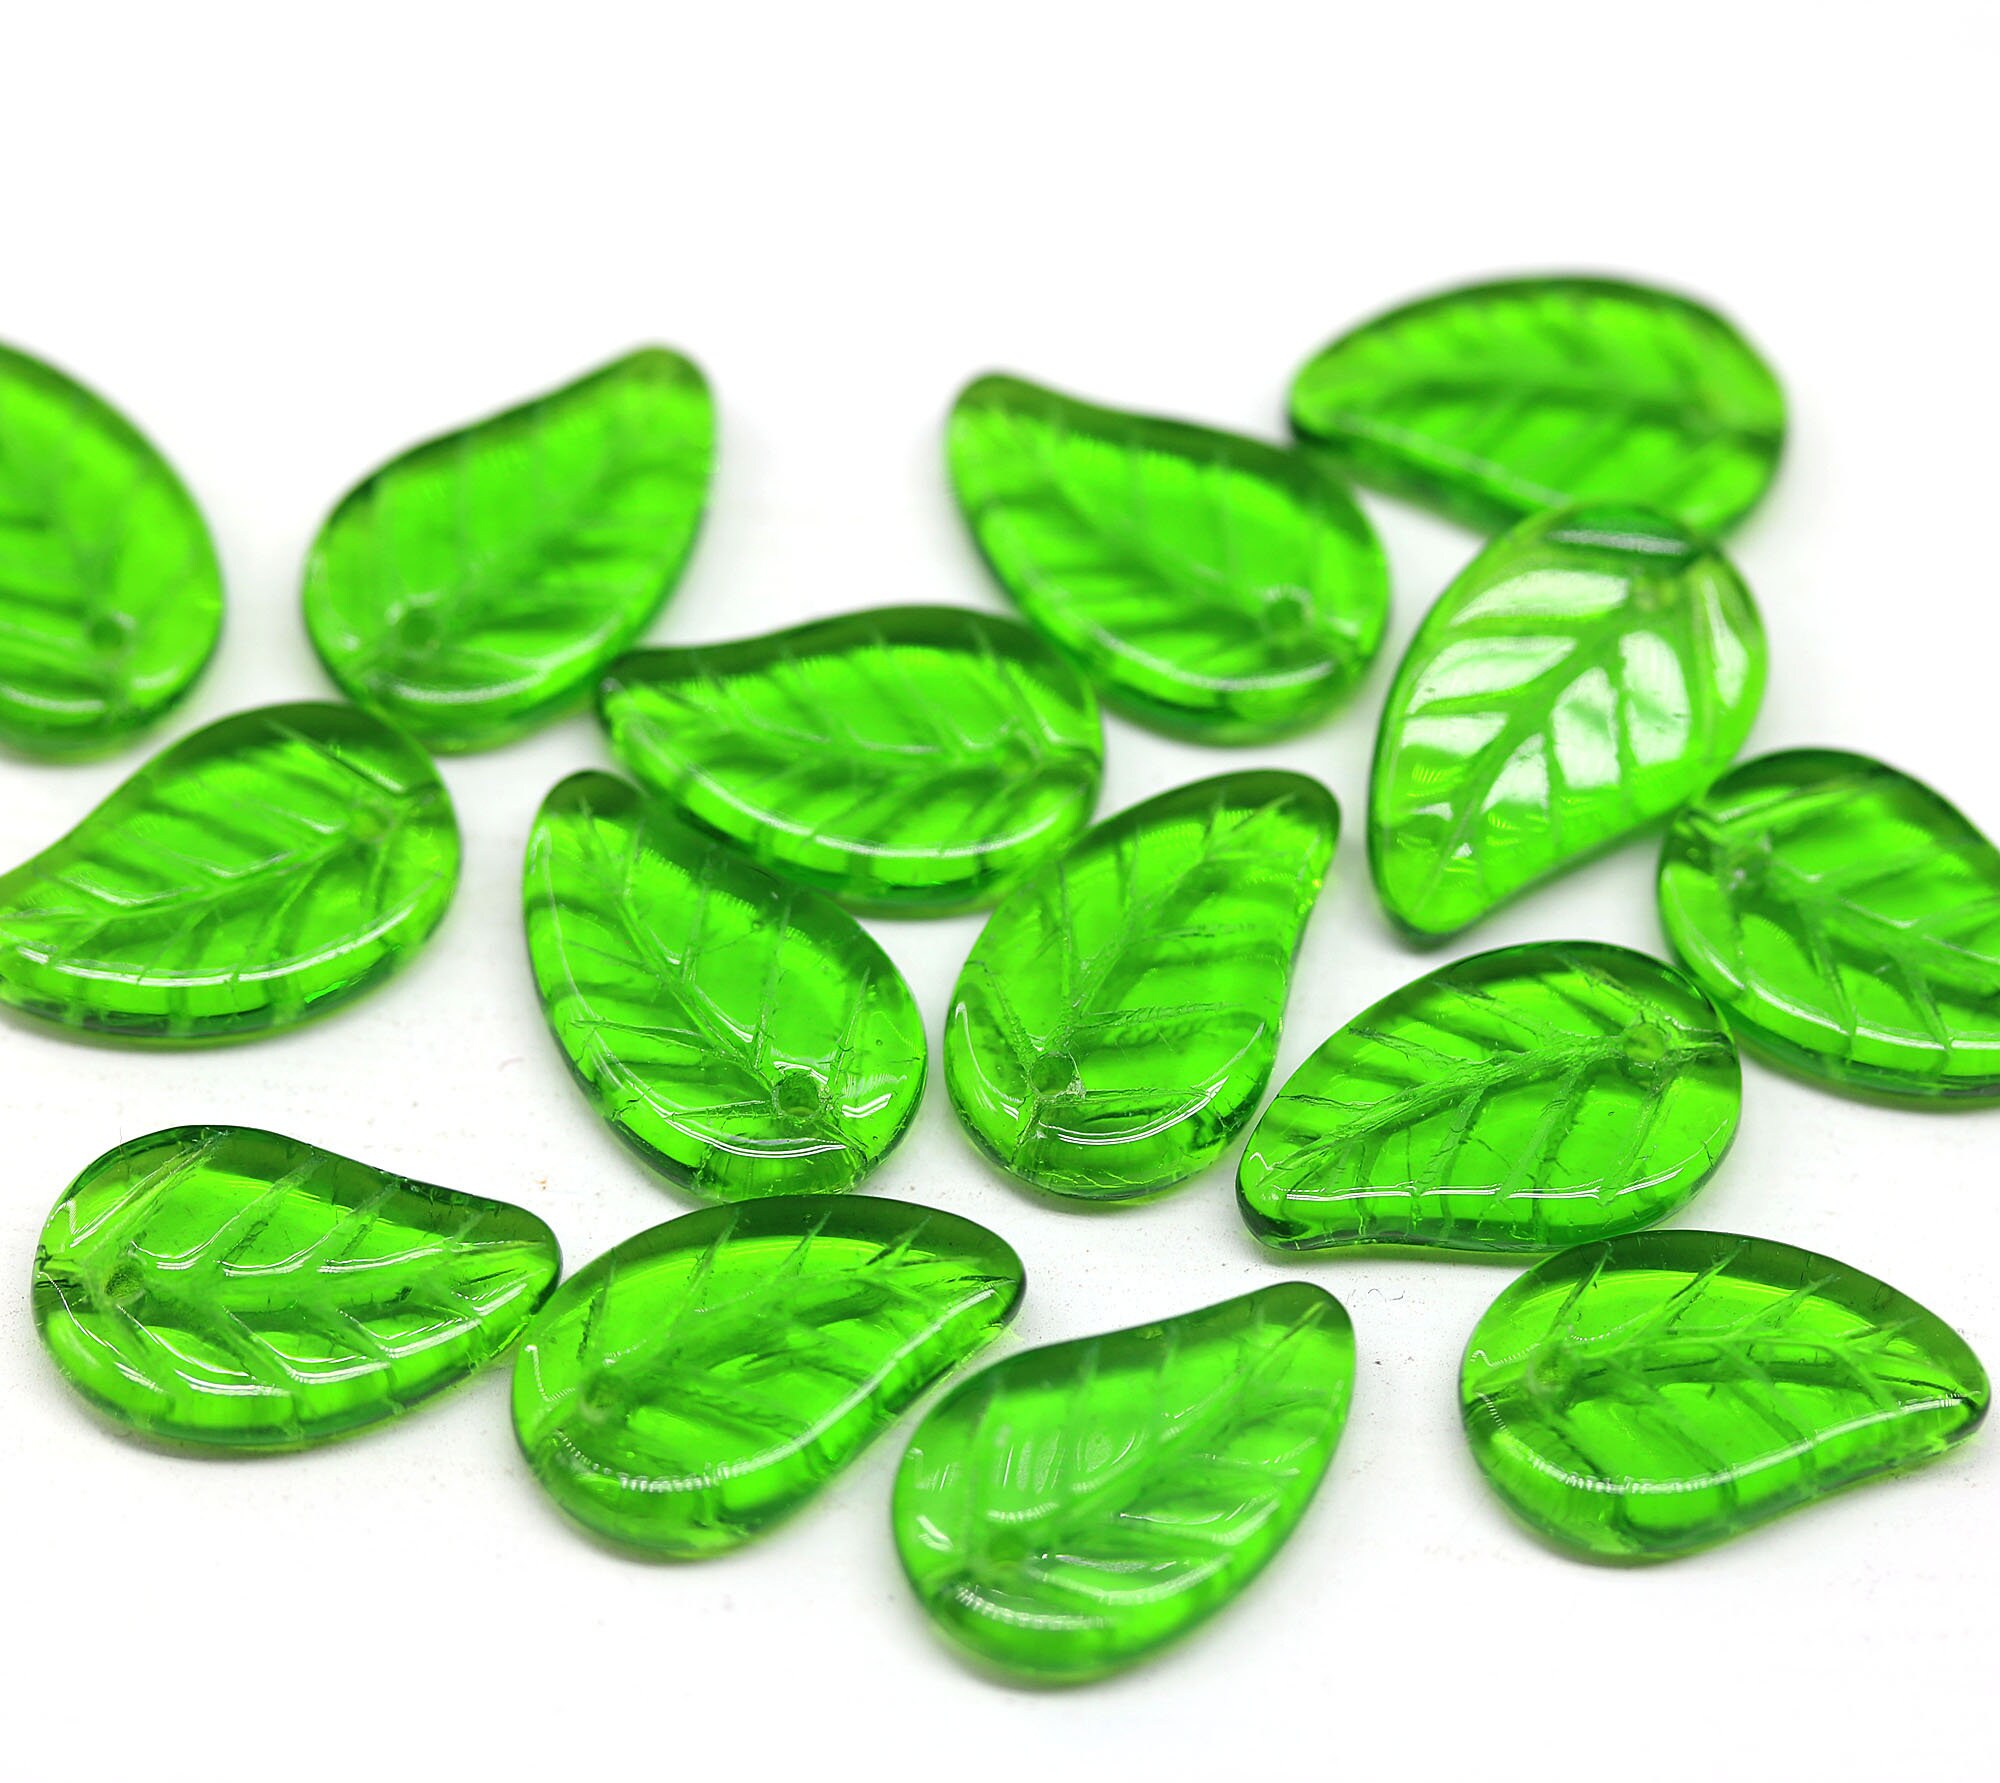 12x7mm 2 Tone Transparent Topaz & Olive Czech Glass Leaf Beads - Qty 20  (BS176) SE freeshipping - Beads and Babble